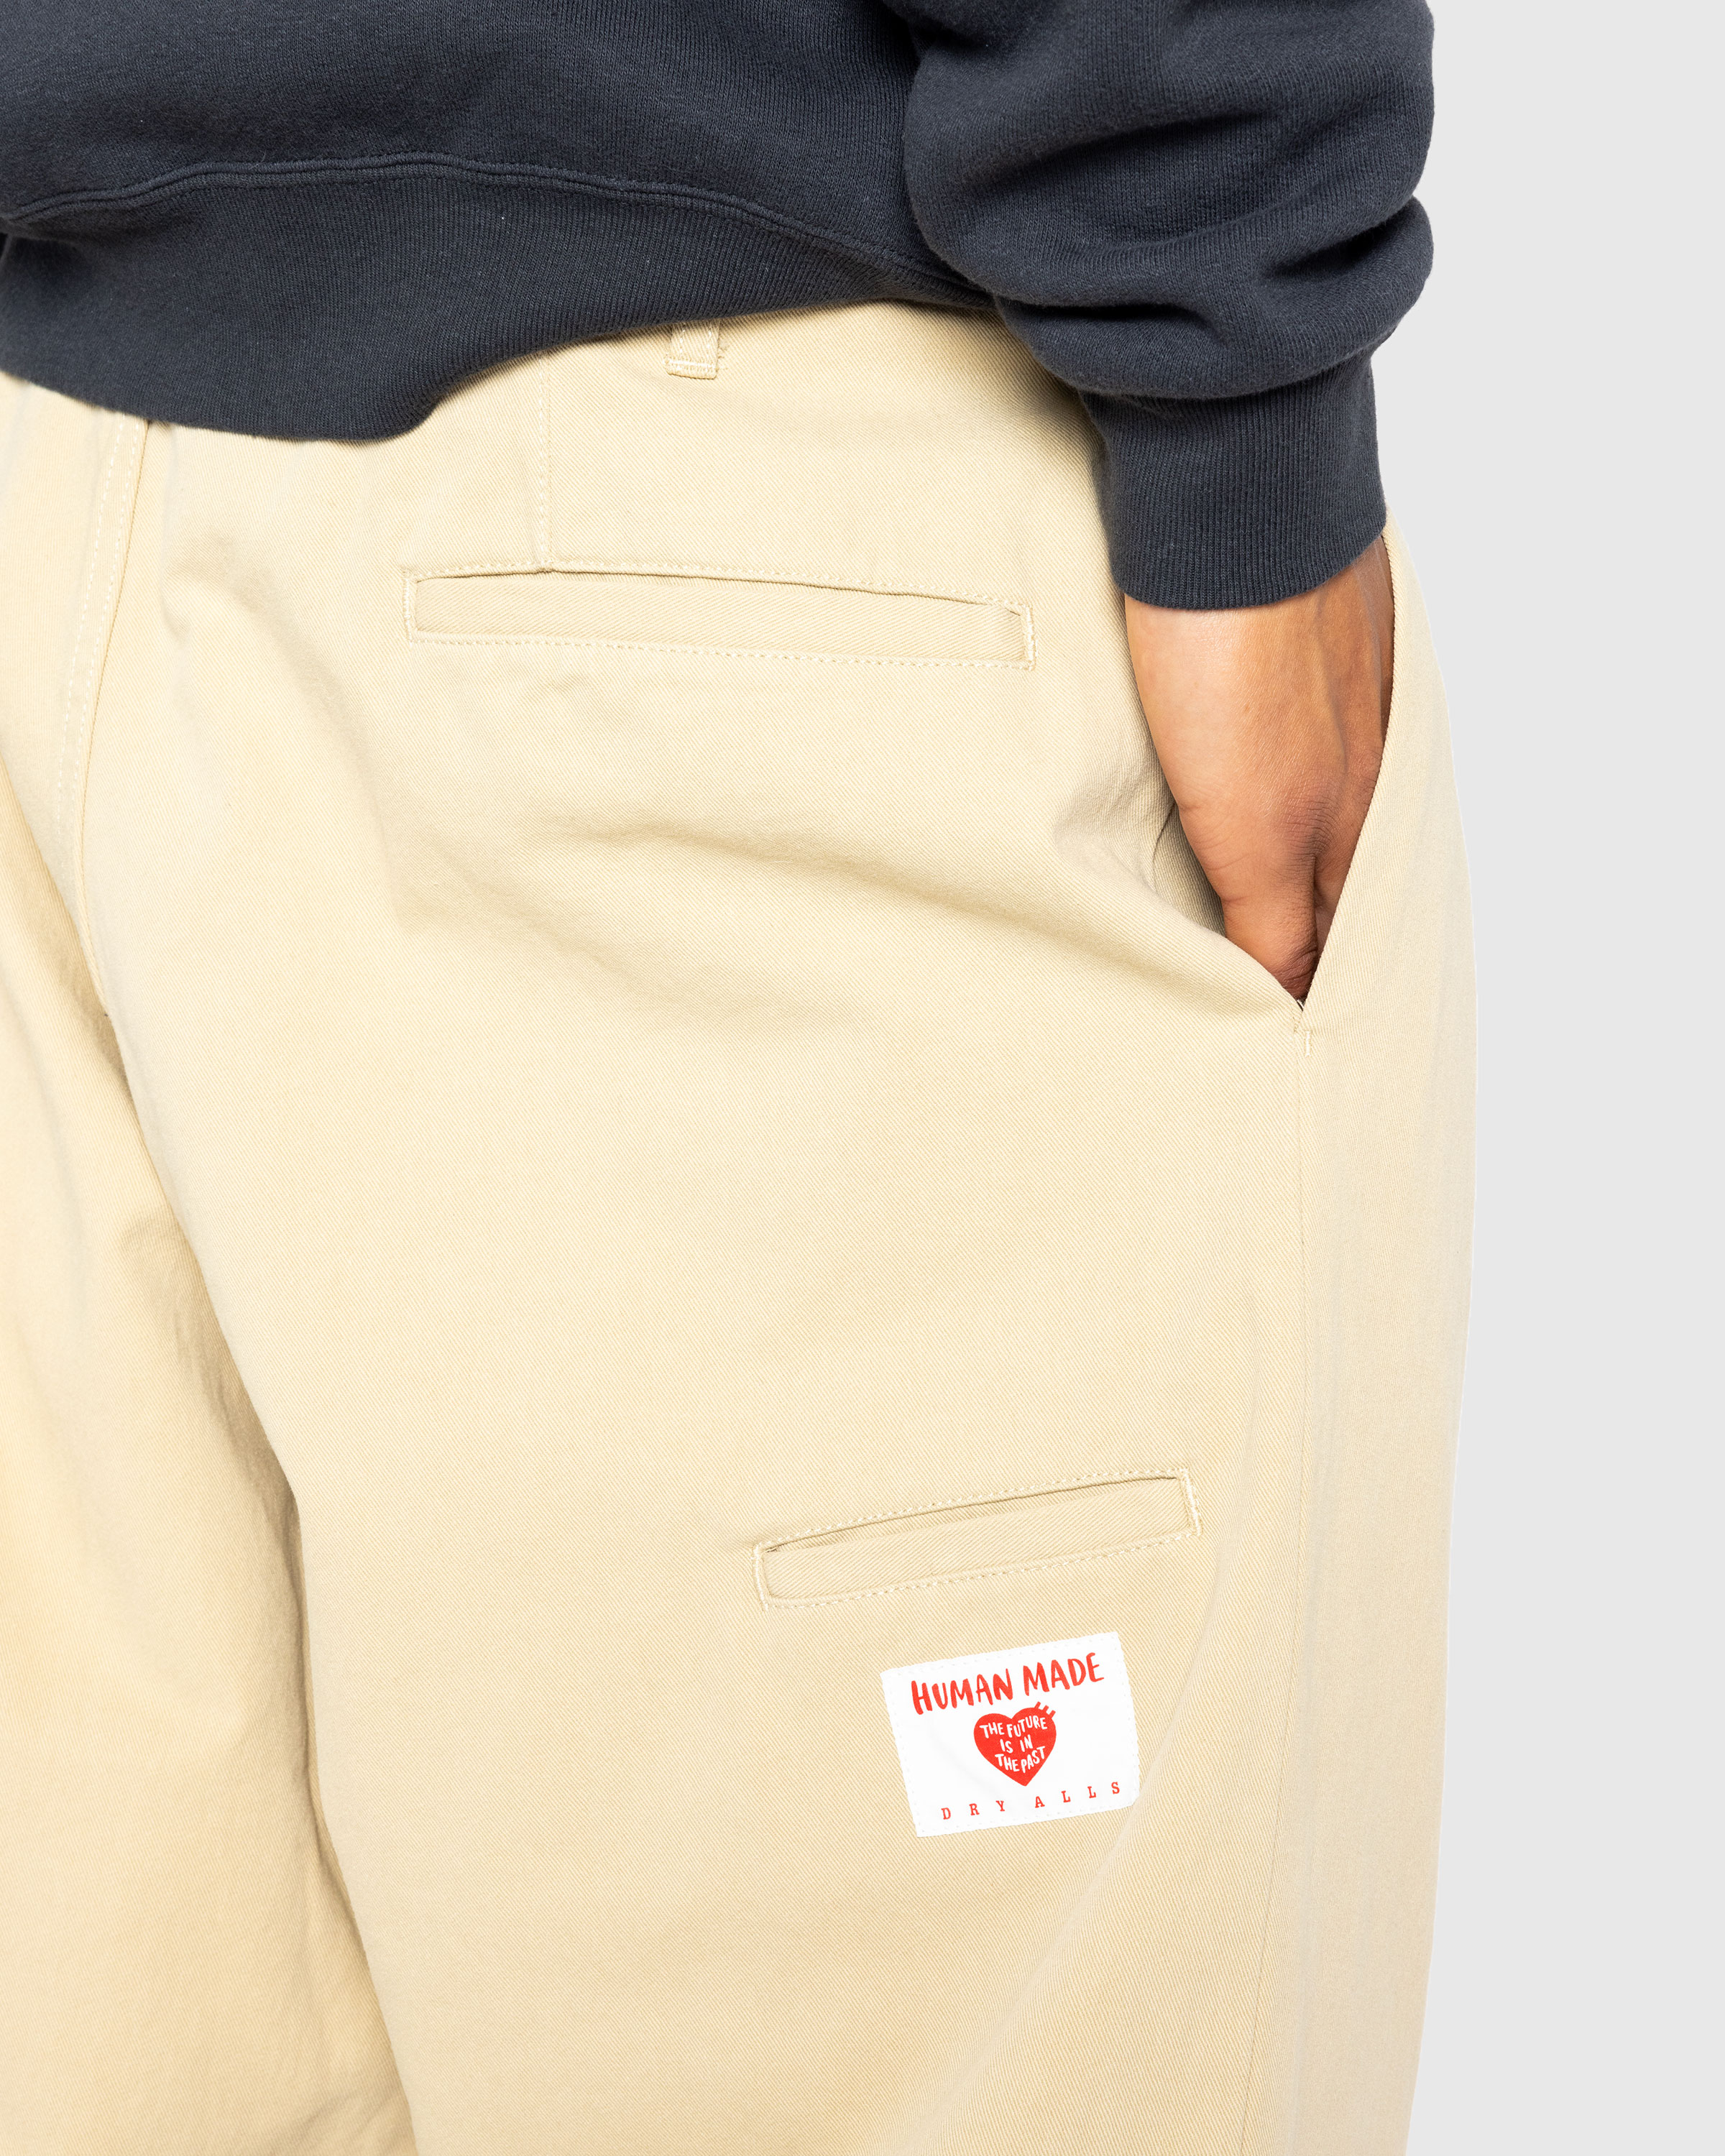 Human Made – Skater Pants Beige - Trousers - Beige - Image 6